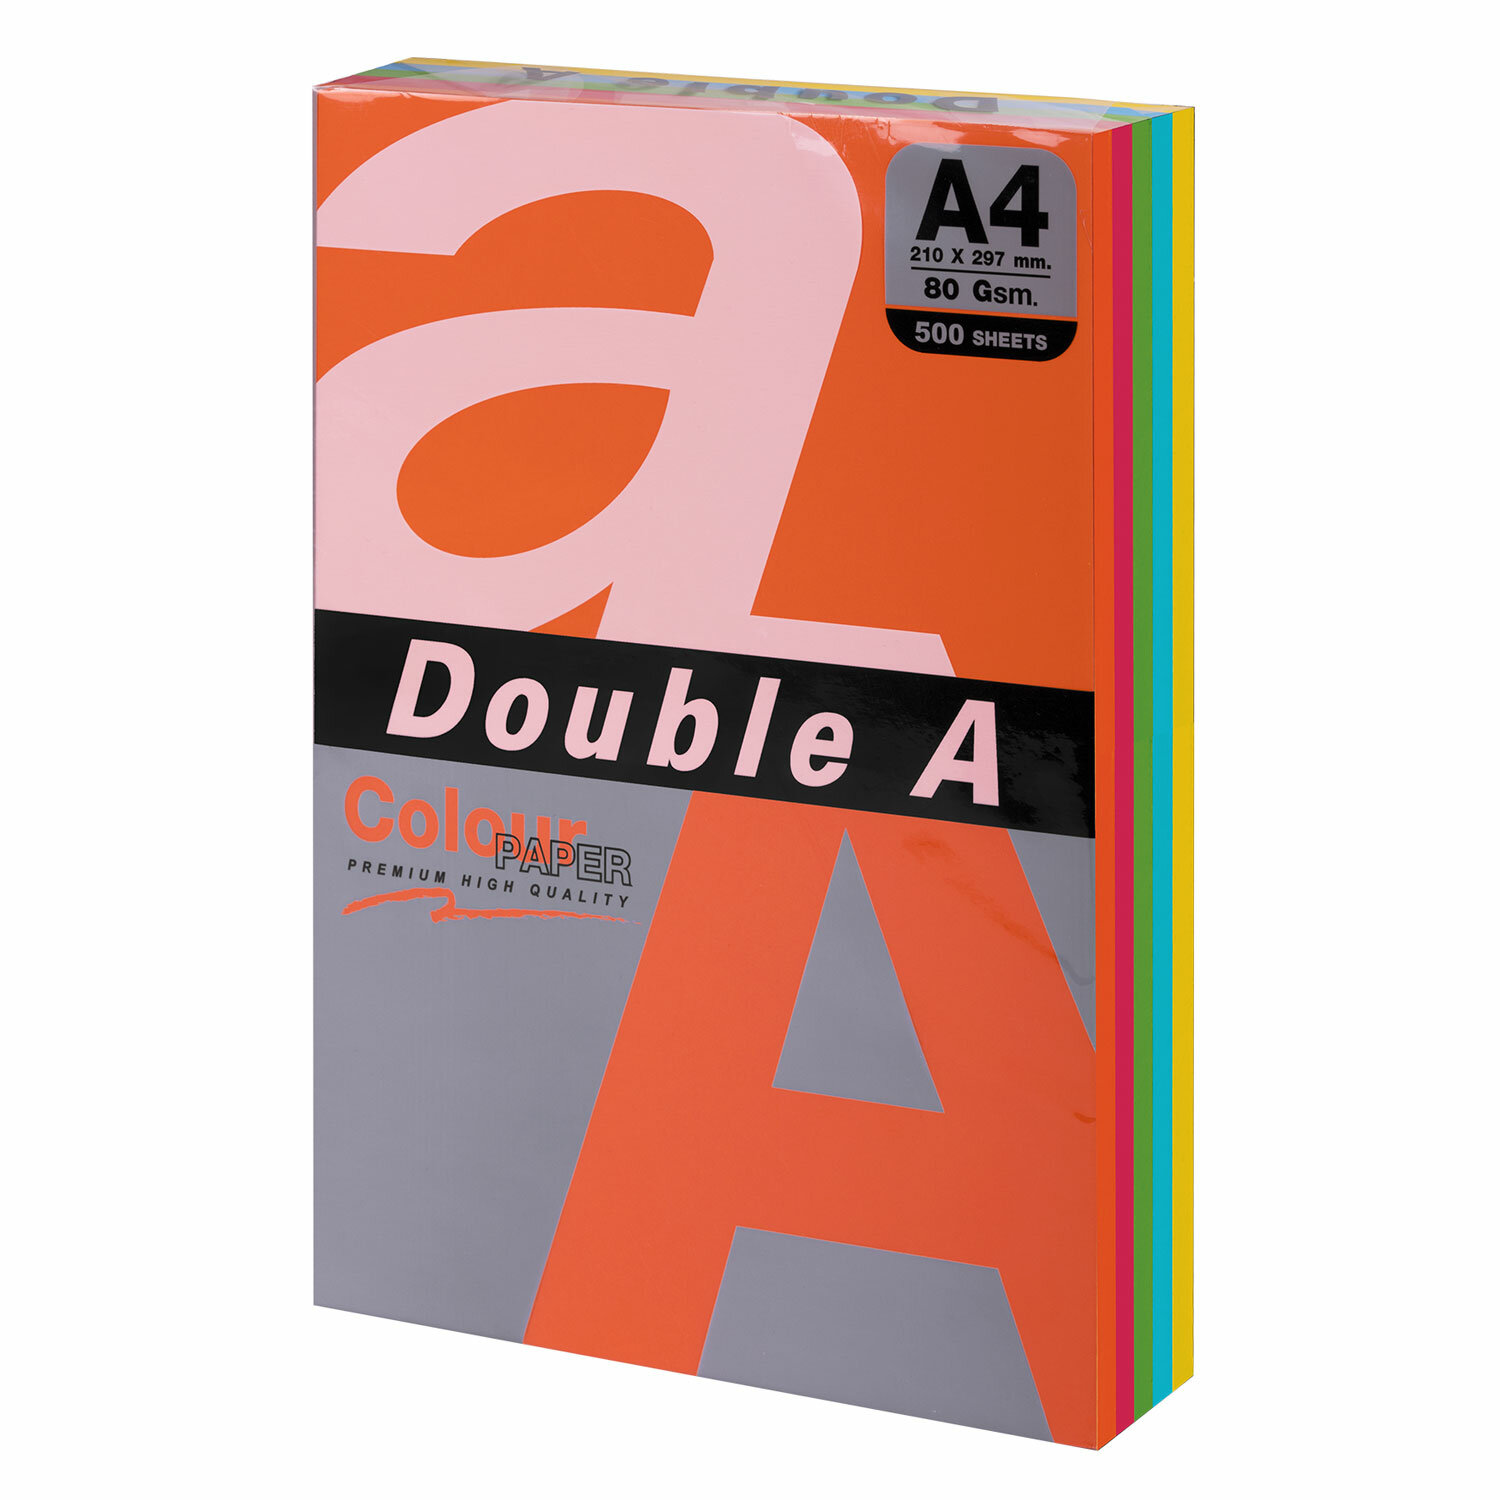   DOUBLE A 4, 80 /2, 500 .,  